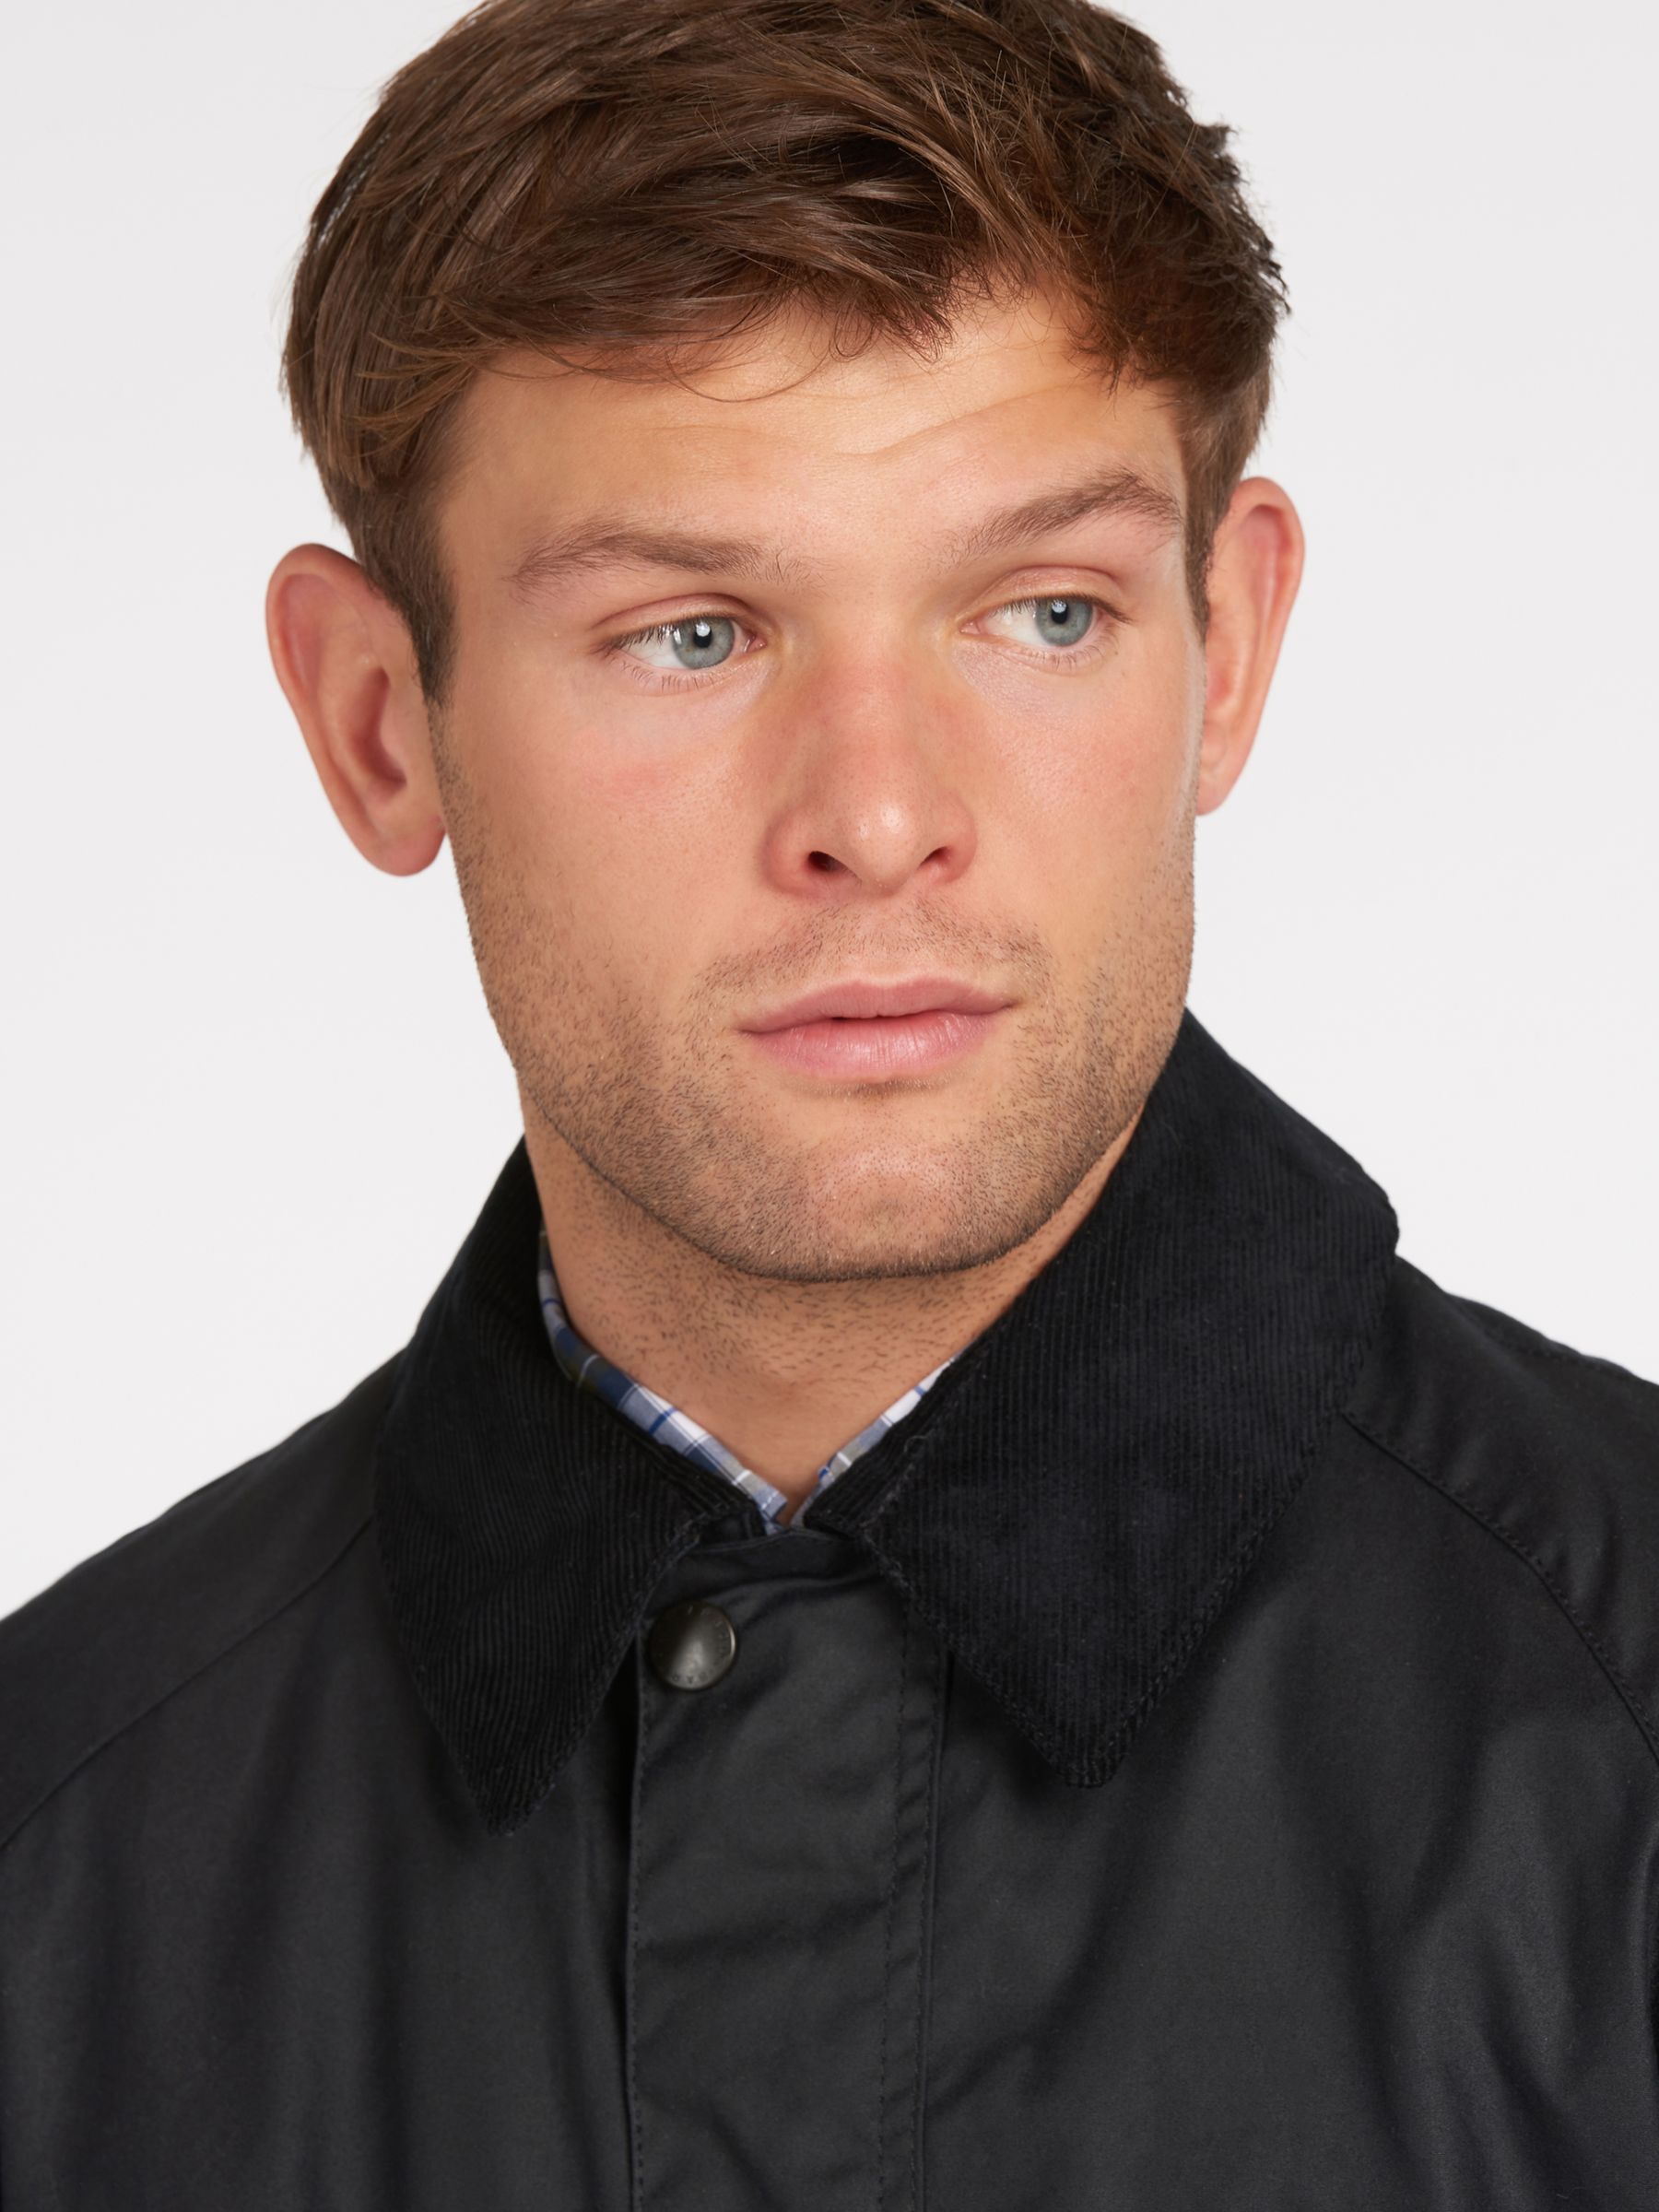 Barbour Ashby Waxed Field Jacket, Navy, S